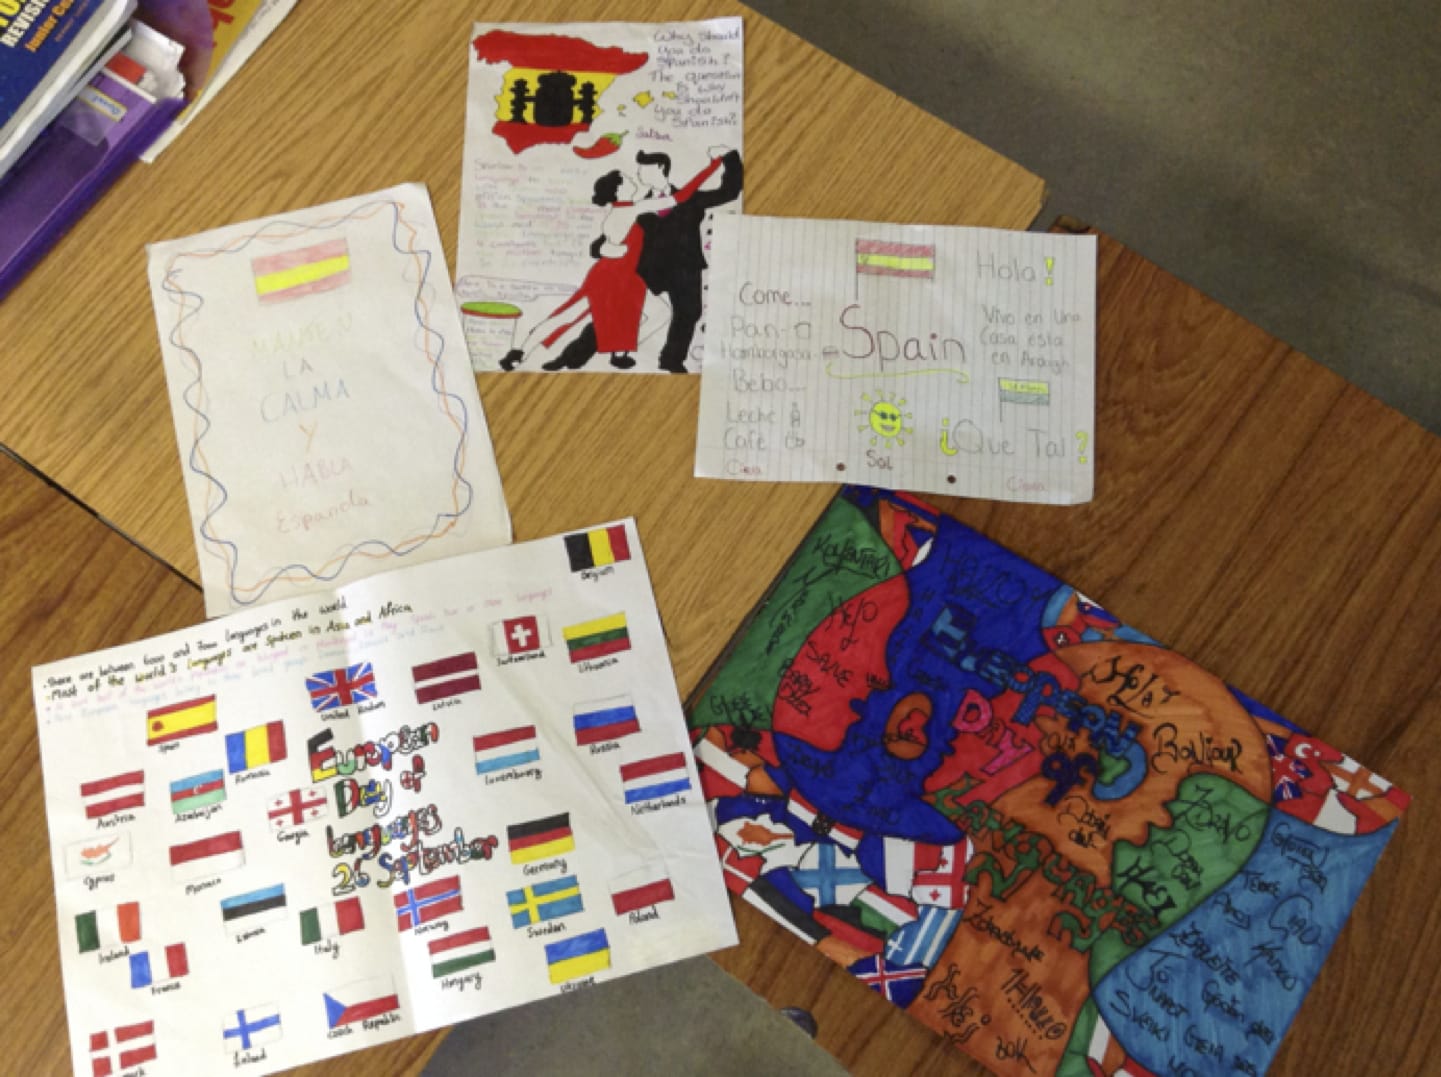 2016: A selection of Posters by the Desmond College Post Primary School Second Year Spanish Students